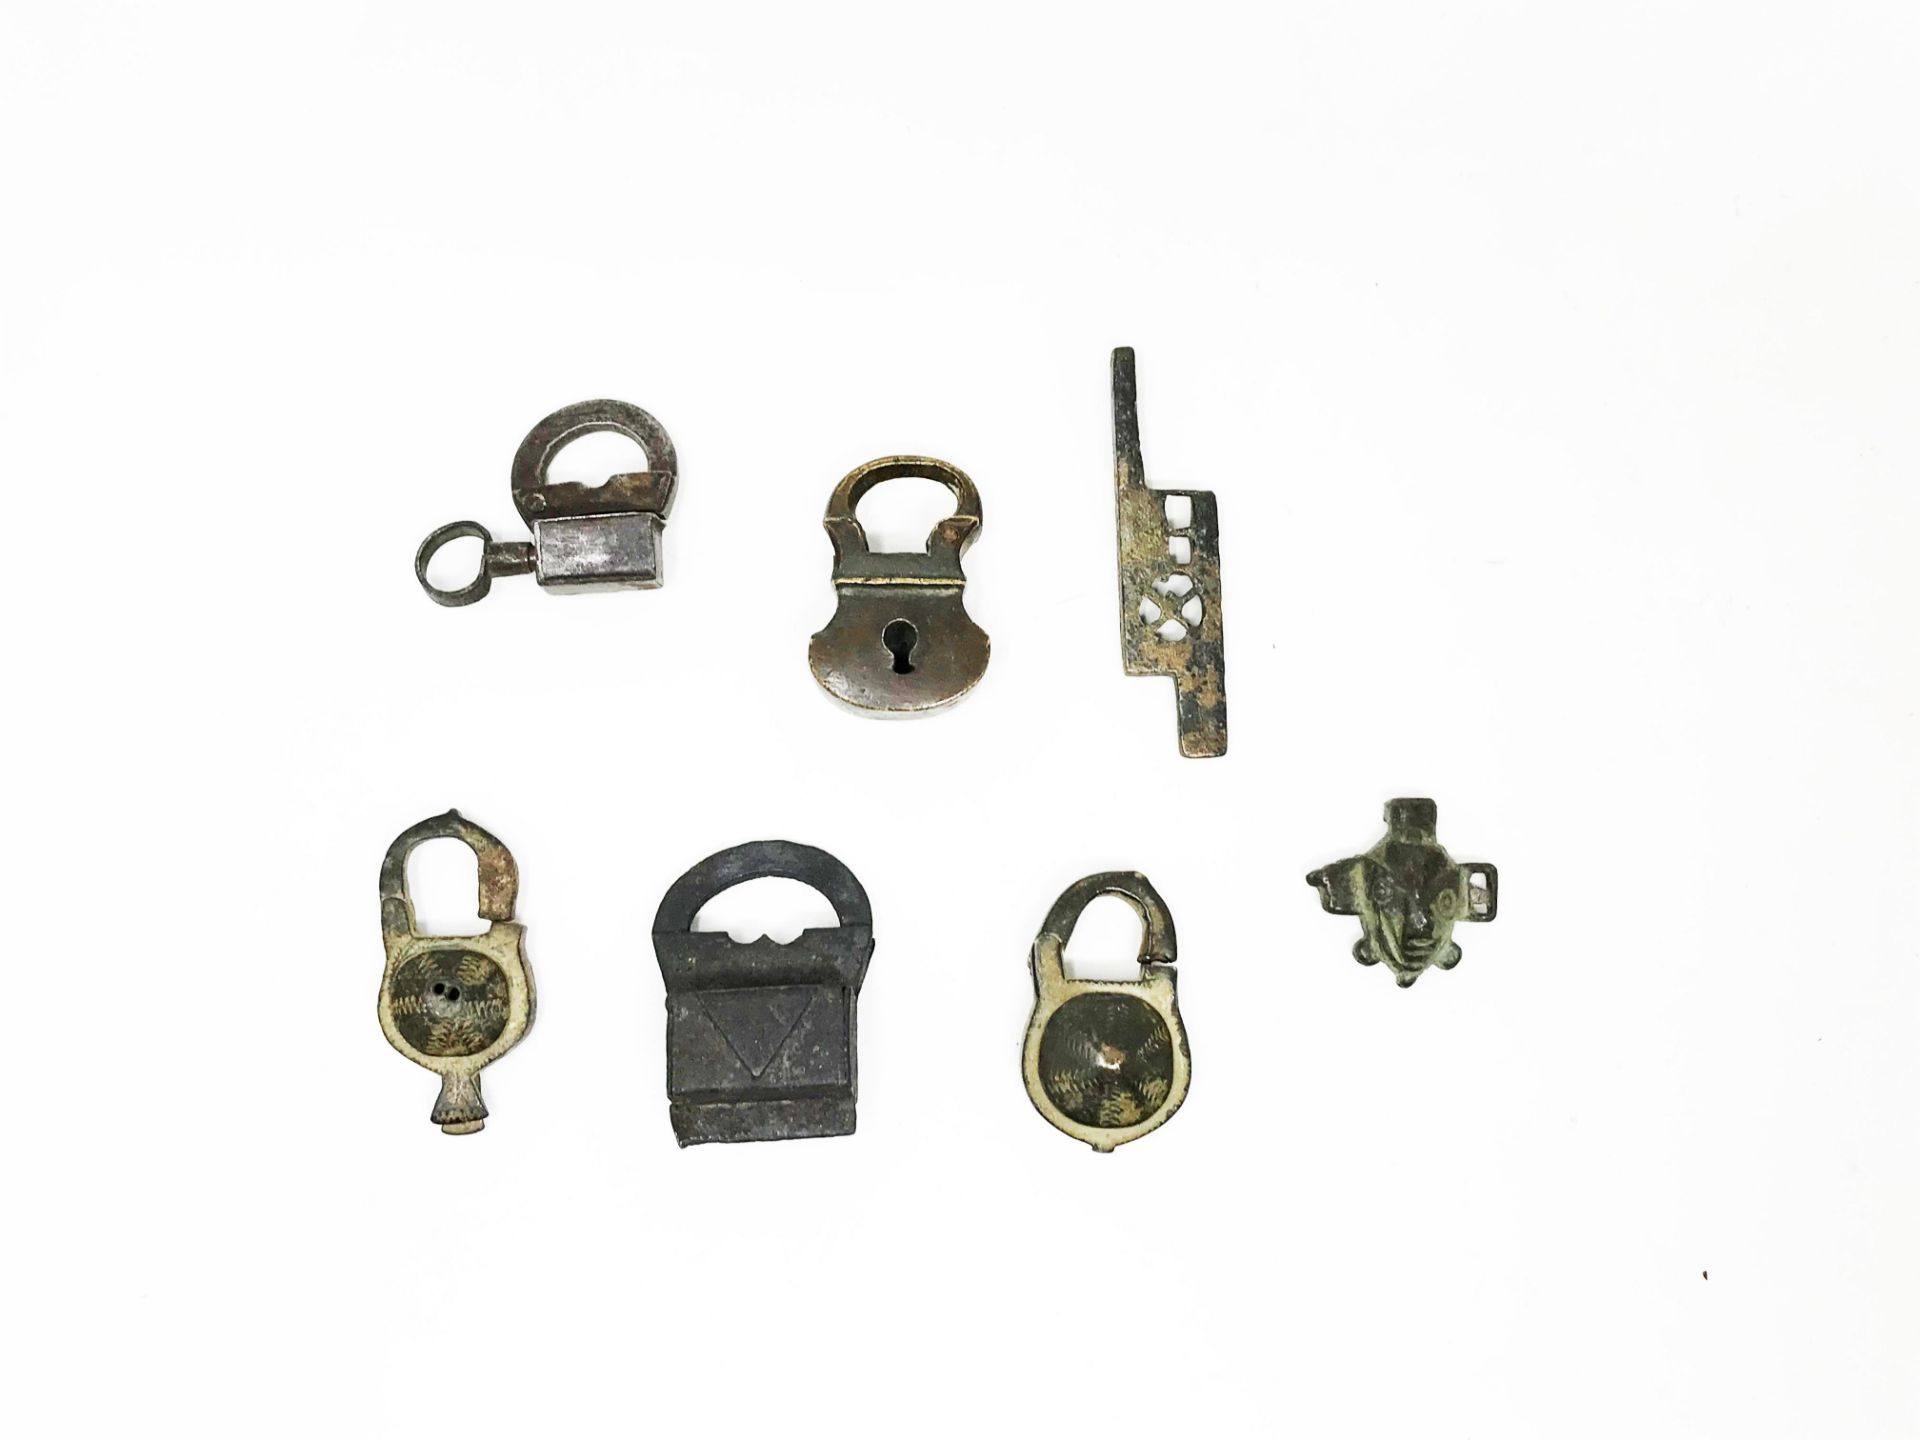 Six padlocks, two iron and four bronze and a lock bolt. H: 4, 48 cm - 3, 53 cm - 4, 96 cm - 5, 18 cm